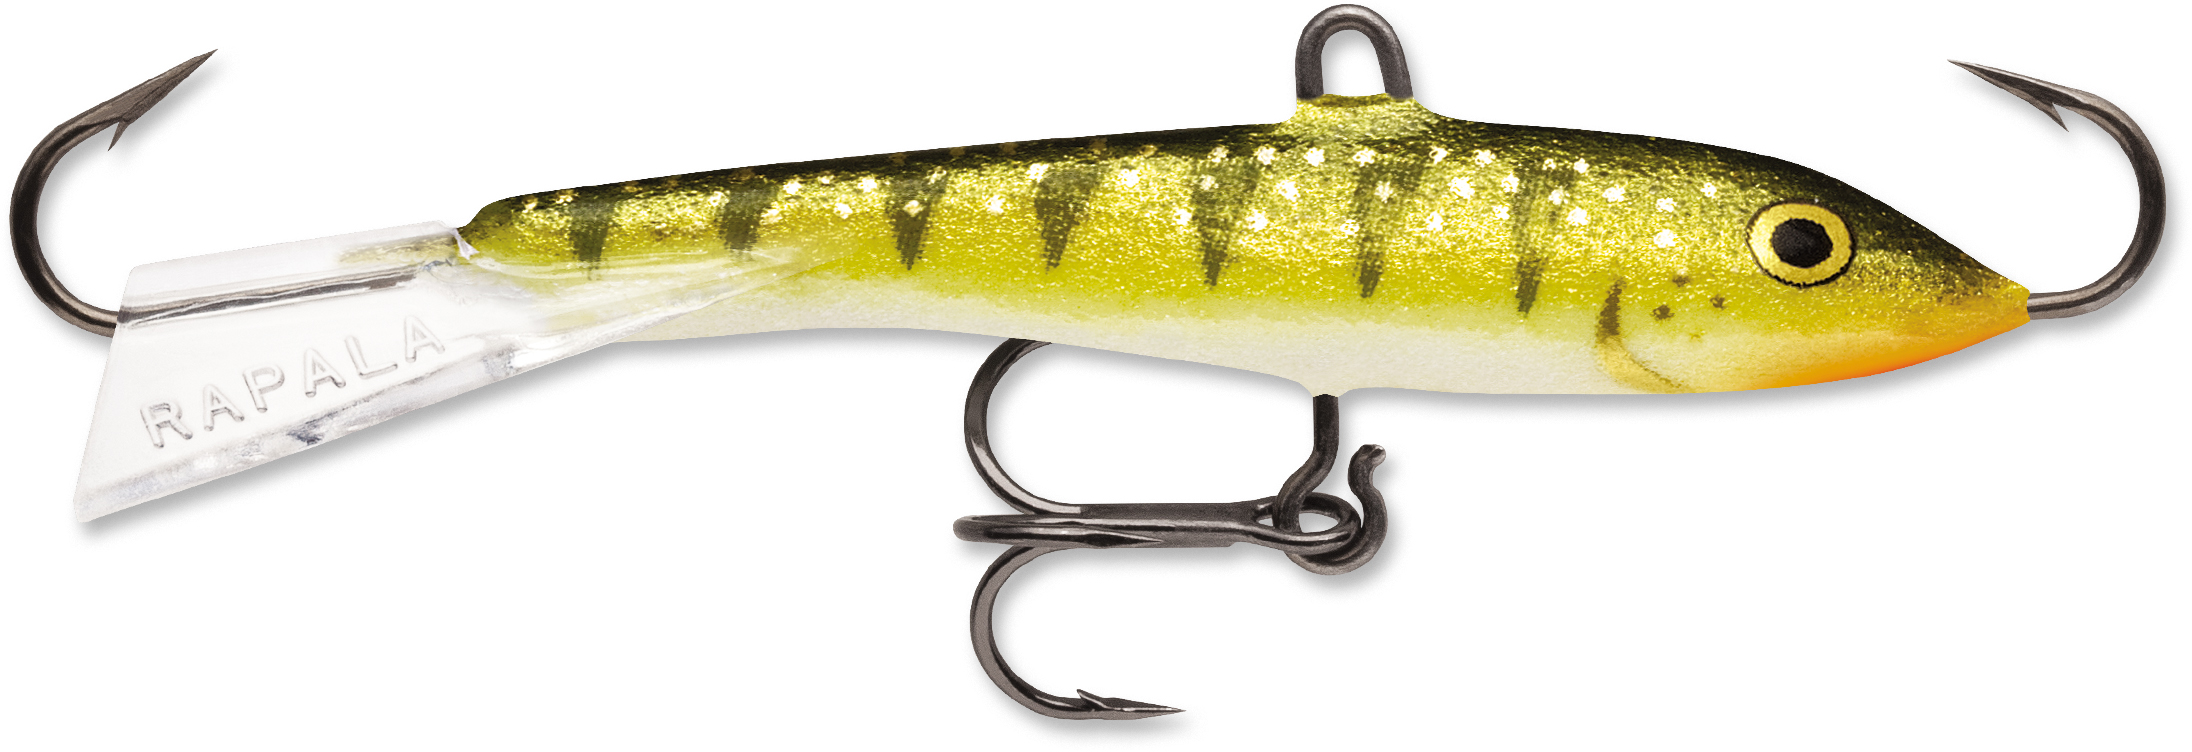 Northland Tackle Pitchin' Puppet - 5/8 oz. - Pink Tiger